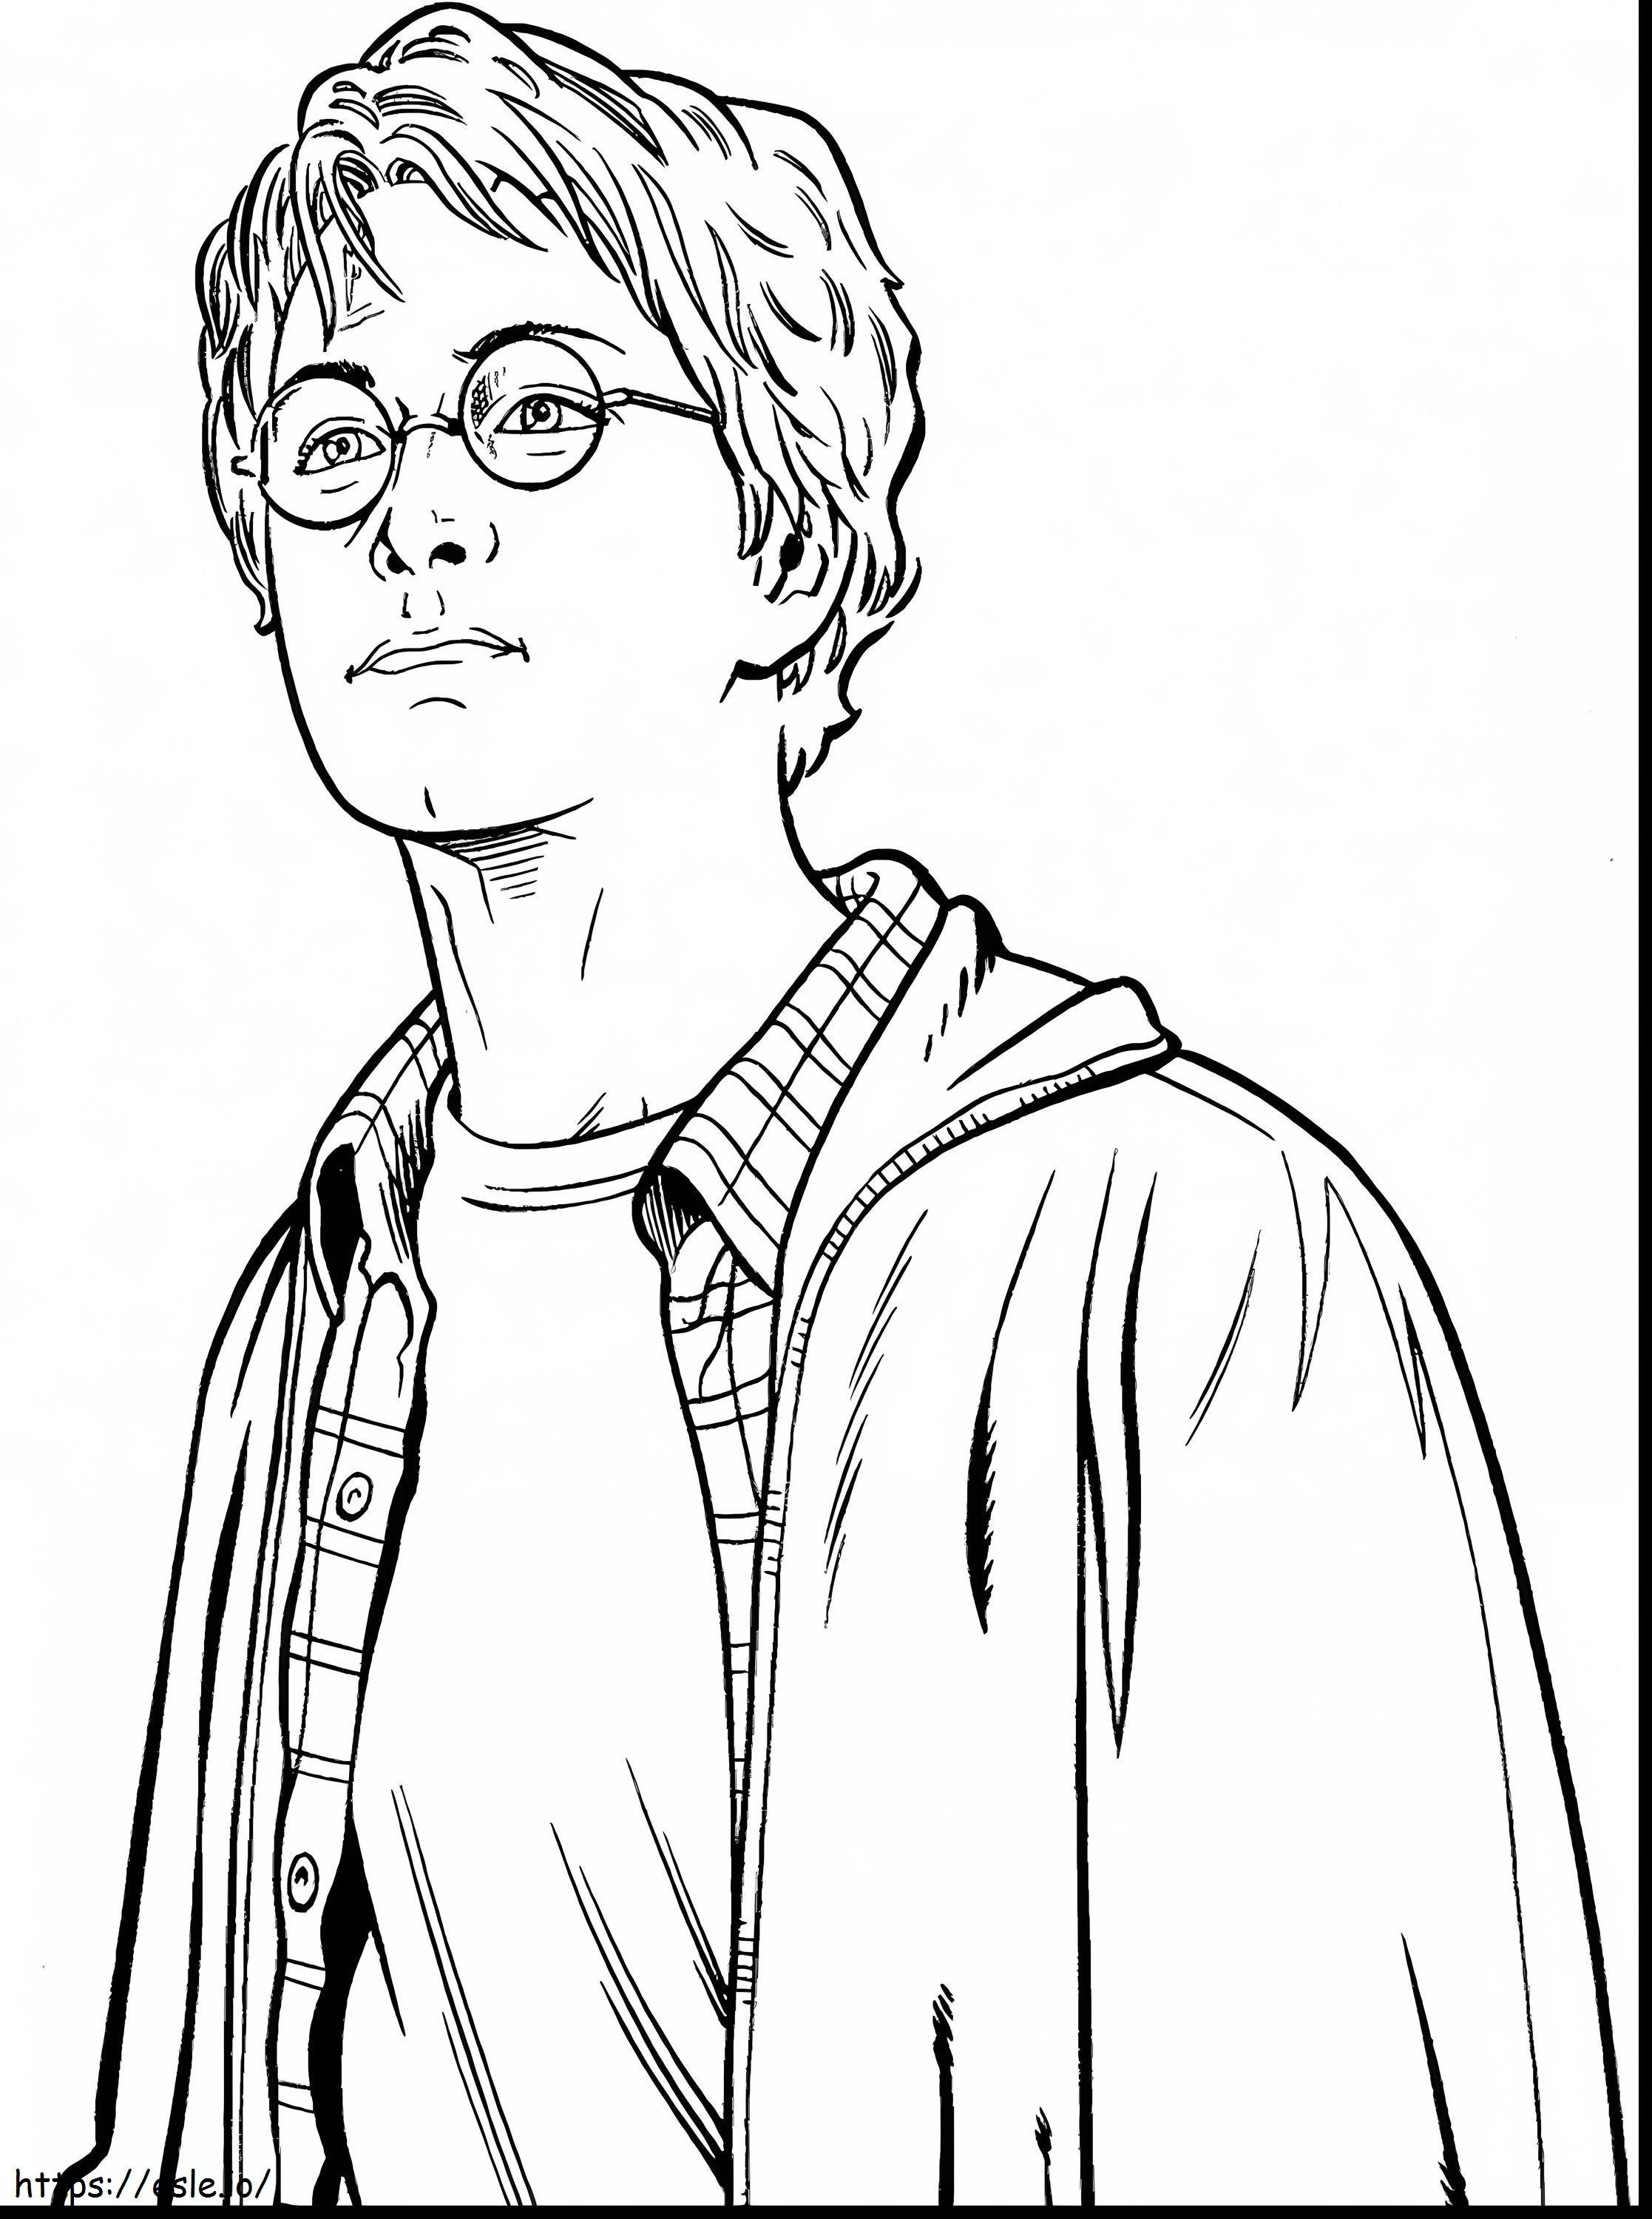 Coloriage  All Posts Tagged Harry Potter Hermione Harry Potter Hermio On Harry Potter Resour à imprimer dessin